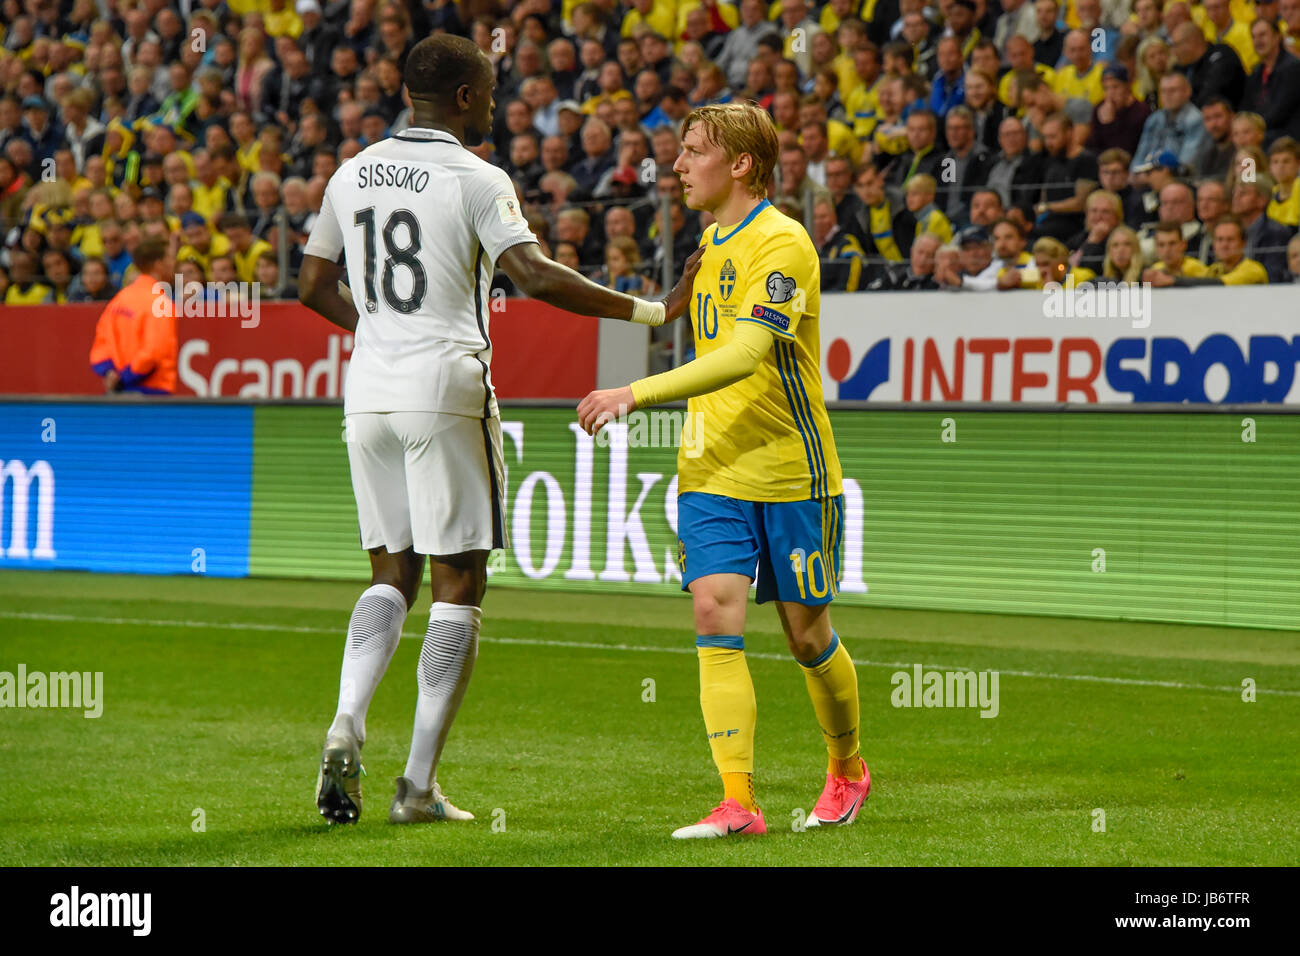 Stockholm, Sweden. 9th June, 2017. France 18 Moussa Sissoko puts his hand on Sweden 10 Emil Forsberg in the FIFA World Cup™ Qualifiers game between Sweden and France. Credit: Bror Persson/Frilansfotograferna/Alamy Live News Stock Photo